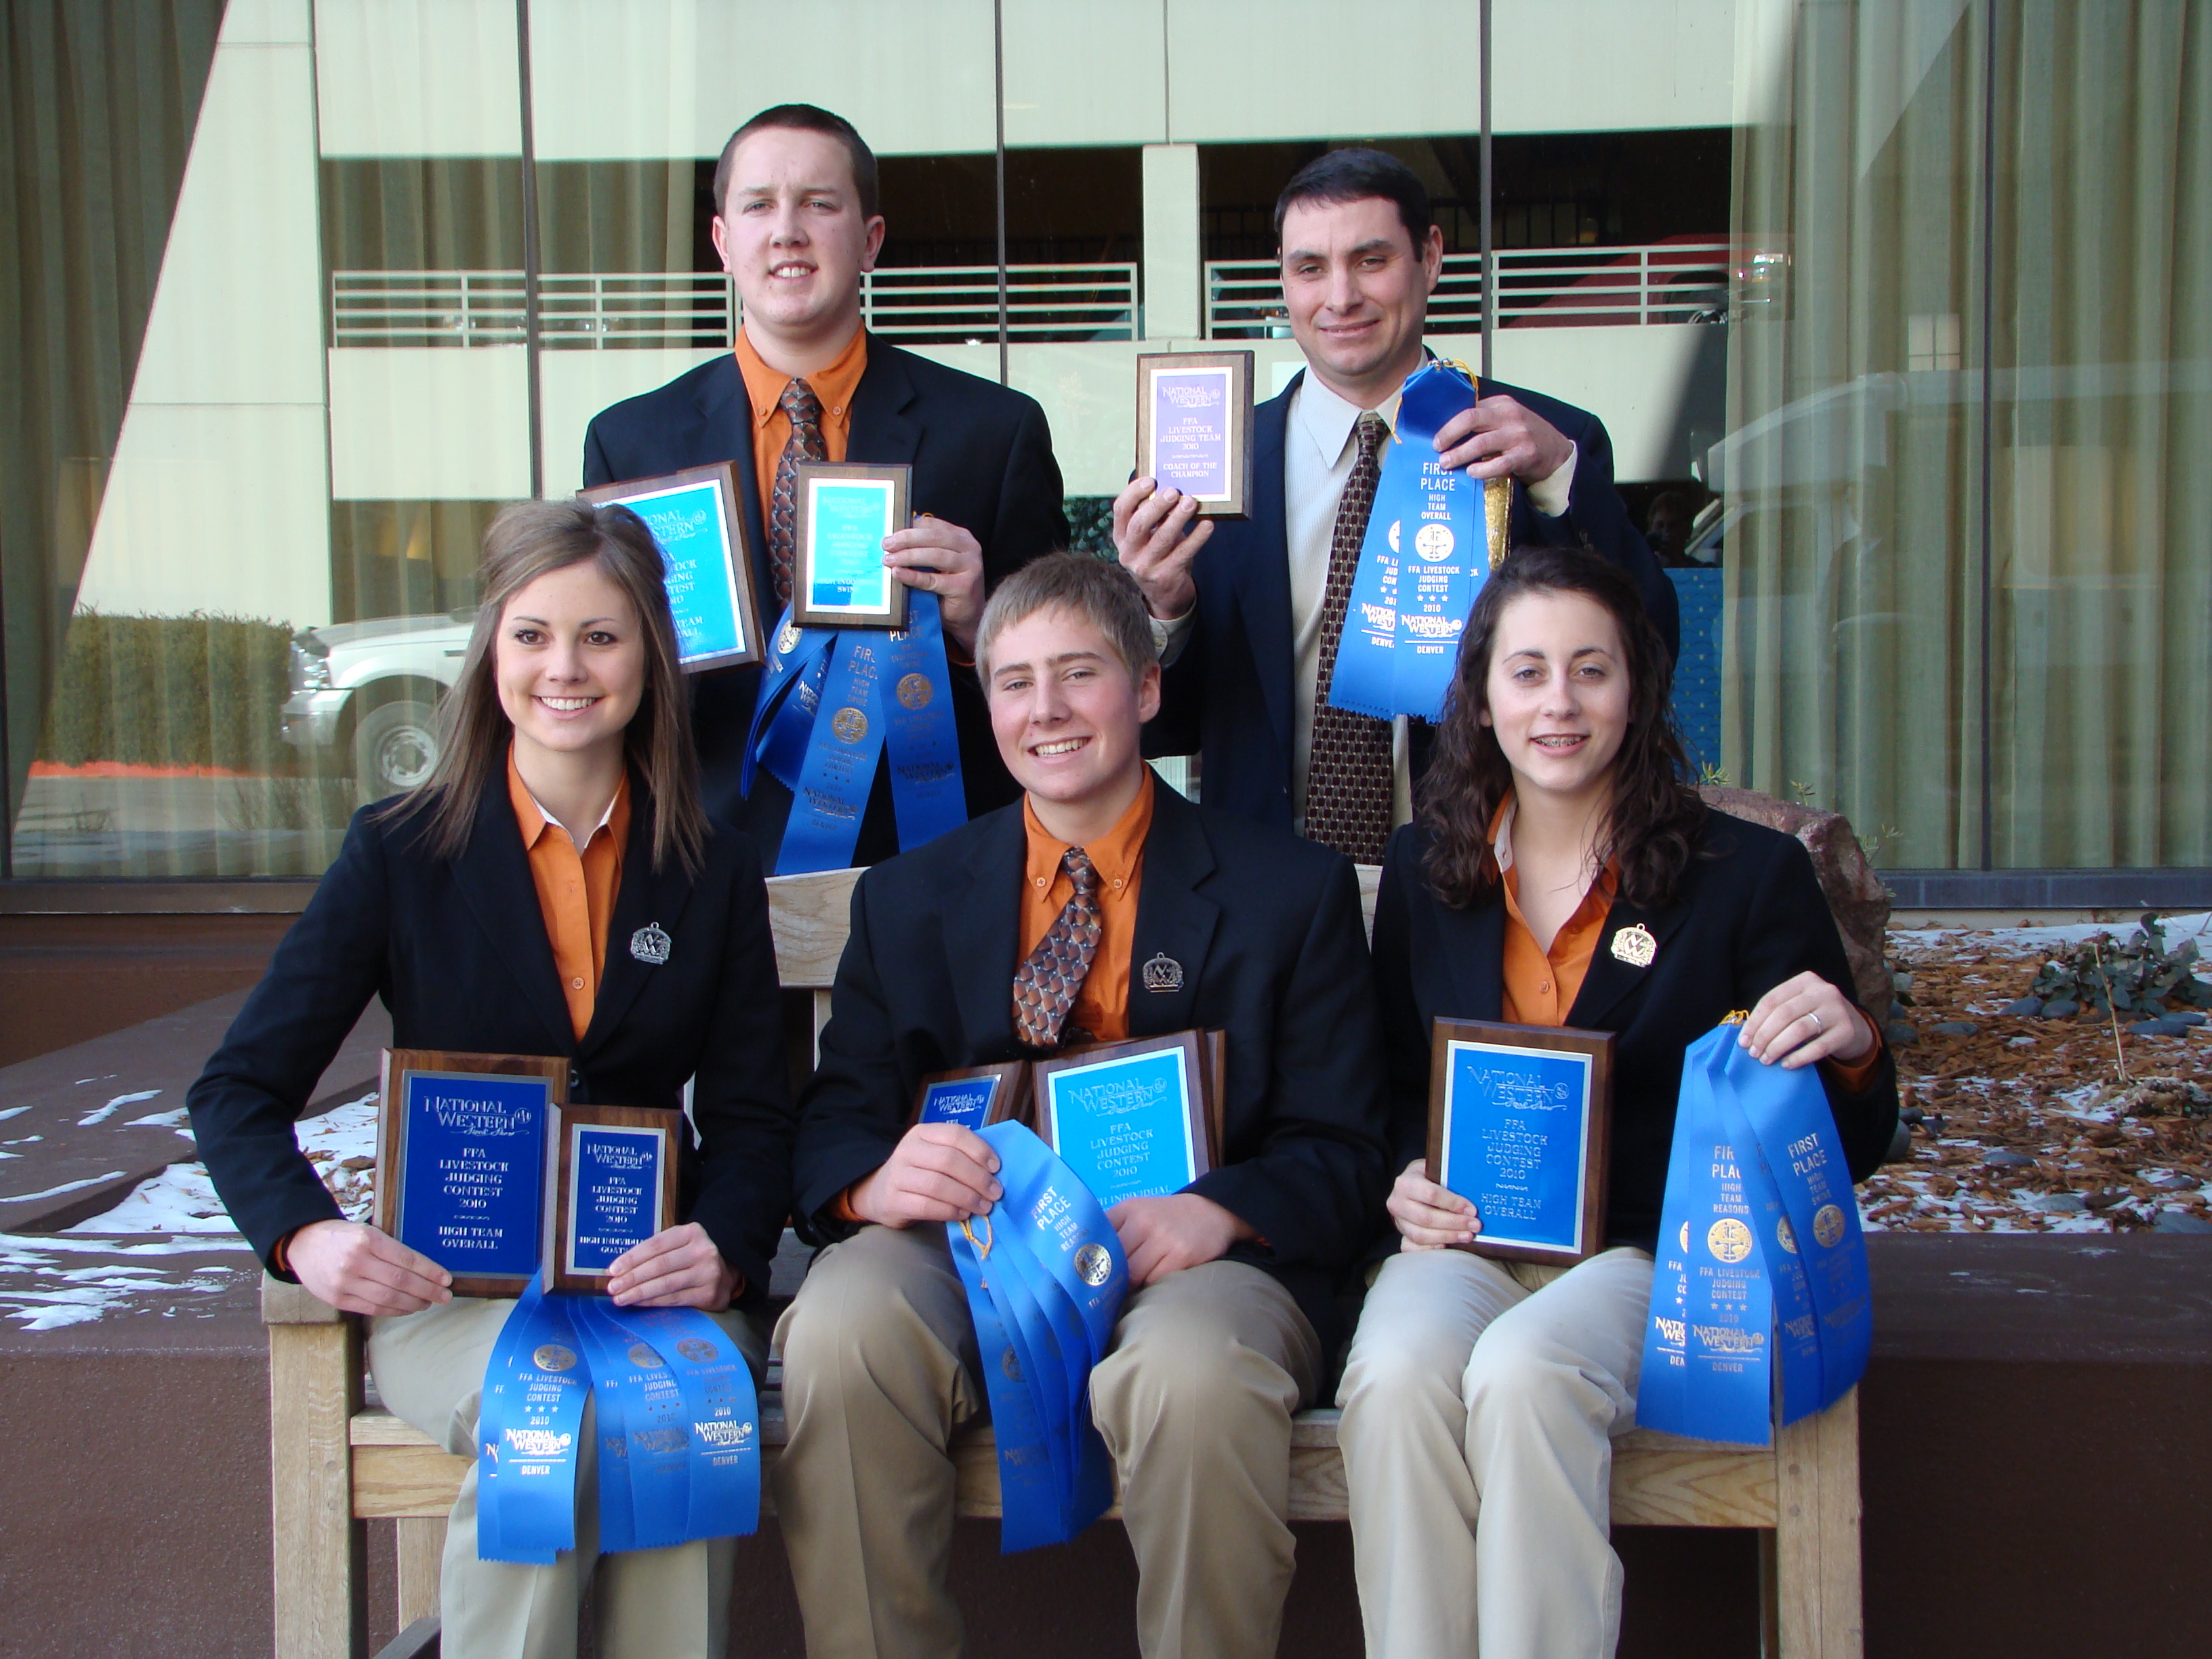 Kingfisher FFA Livestock Judging Team Claims Top Honors at National Western in Denver